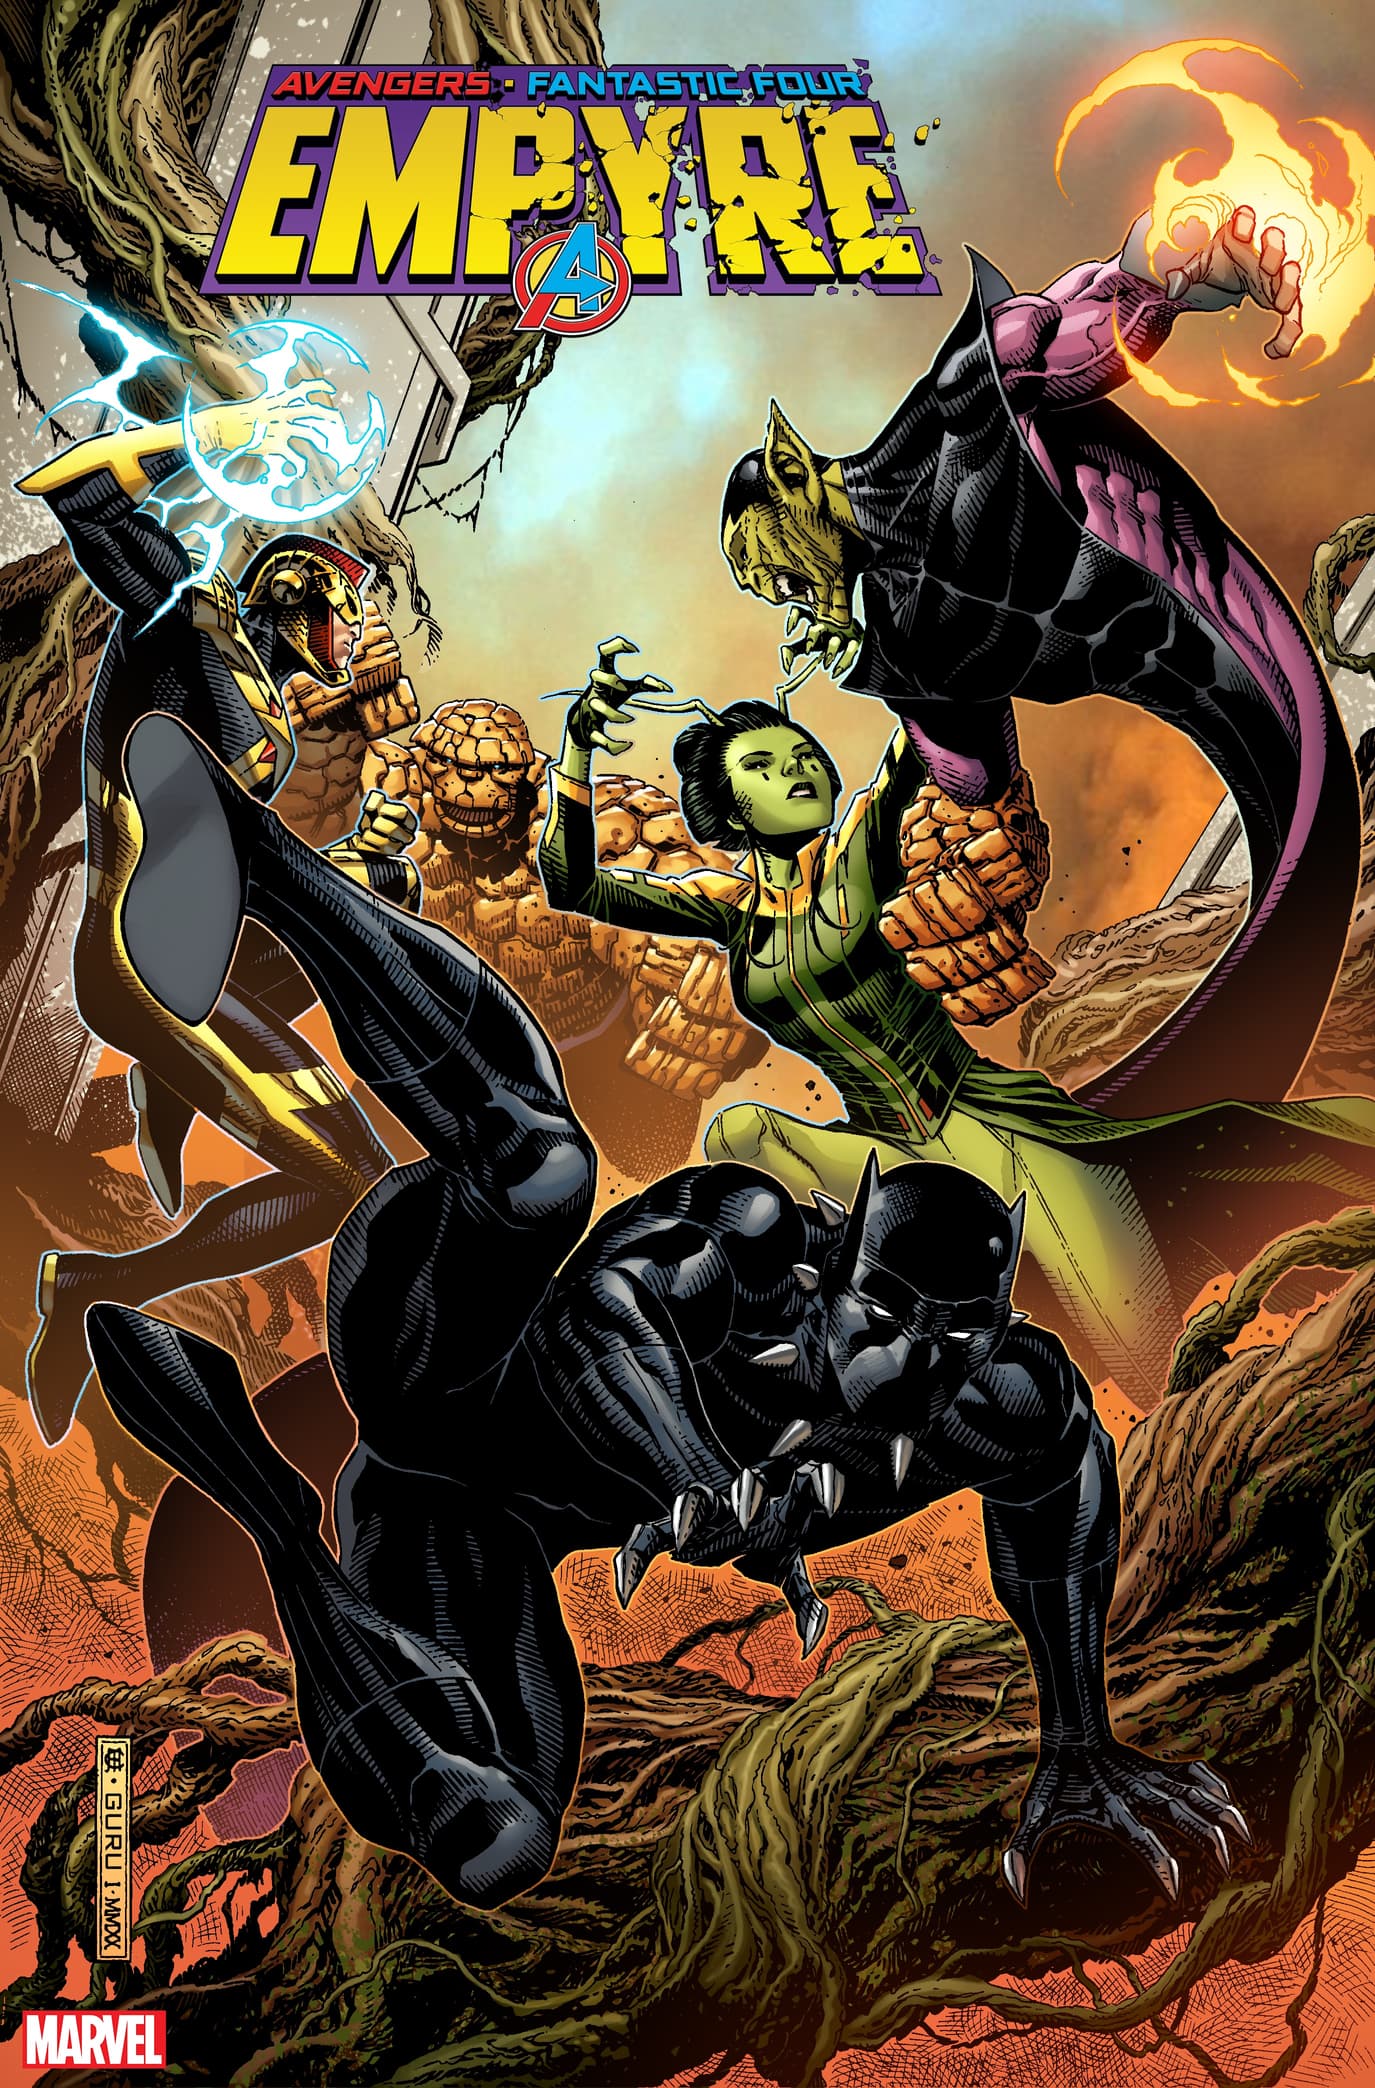 Empyre #3 written by AL EWING and DAN SLOTT with art by VALERIO SCHITI and cOVER by JIM CHEUNG